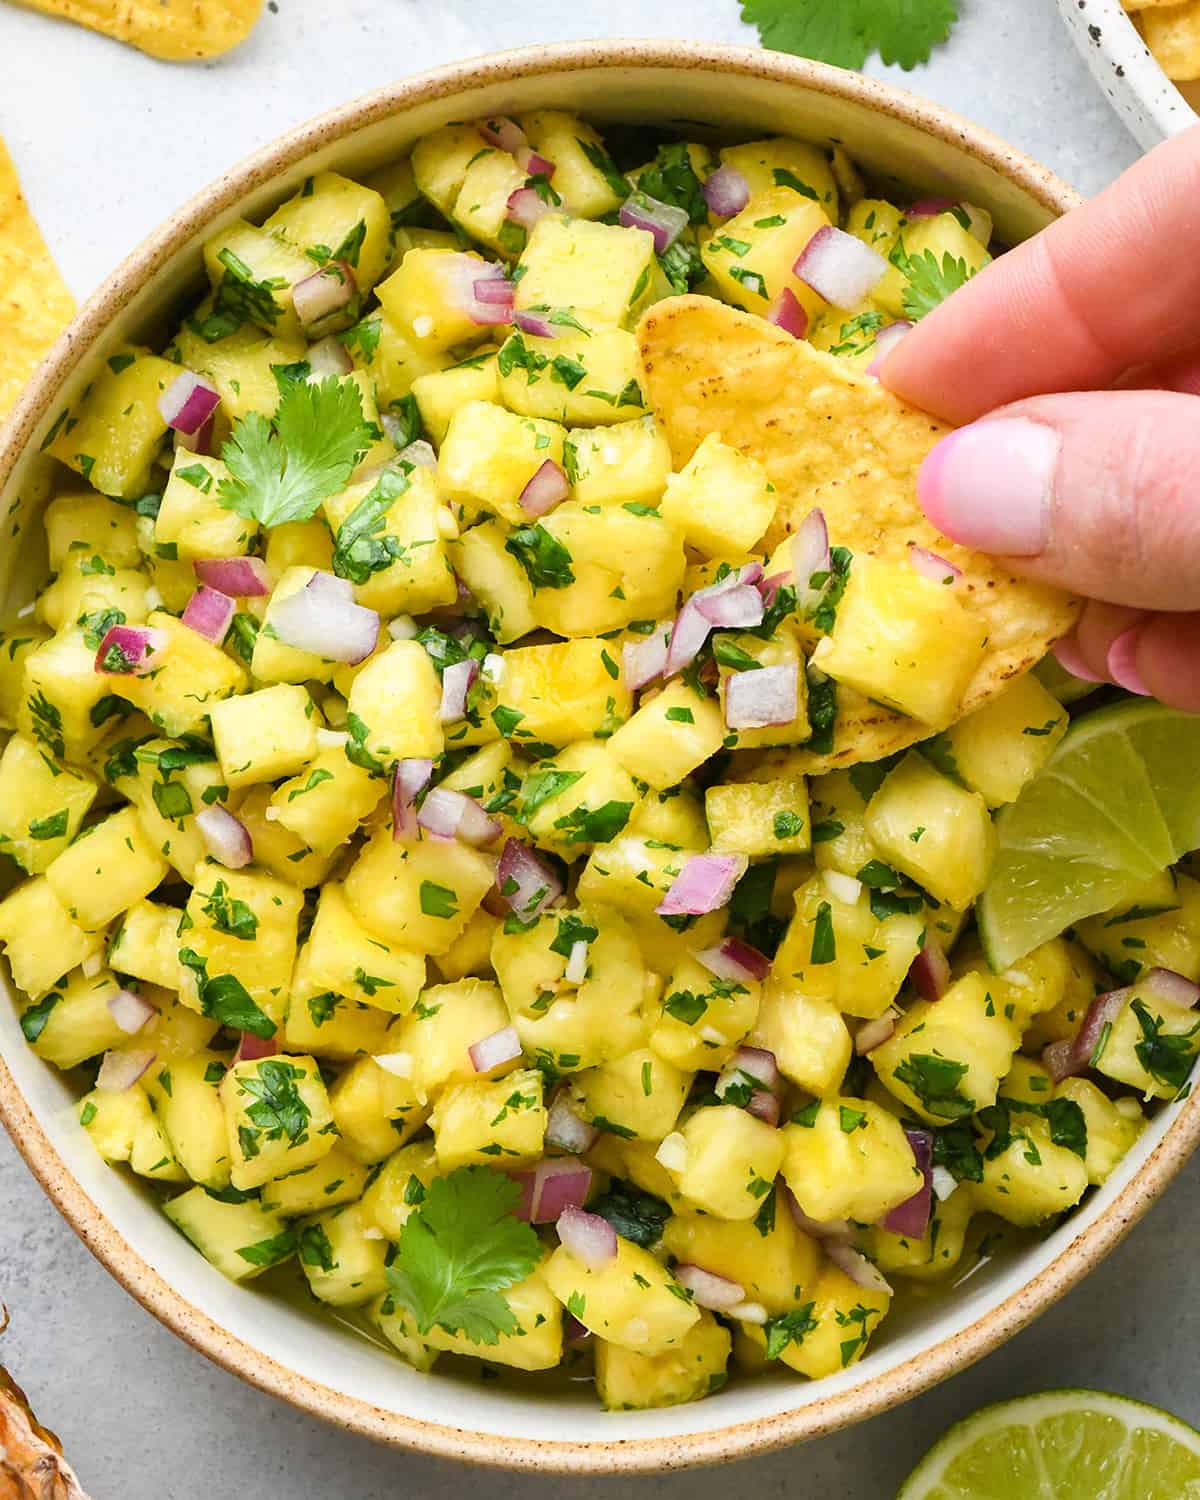 a chip scooping Pineapple Salsa out of a bowl